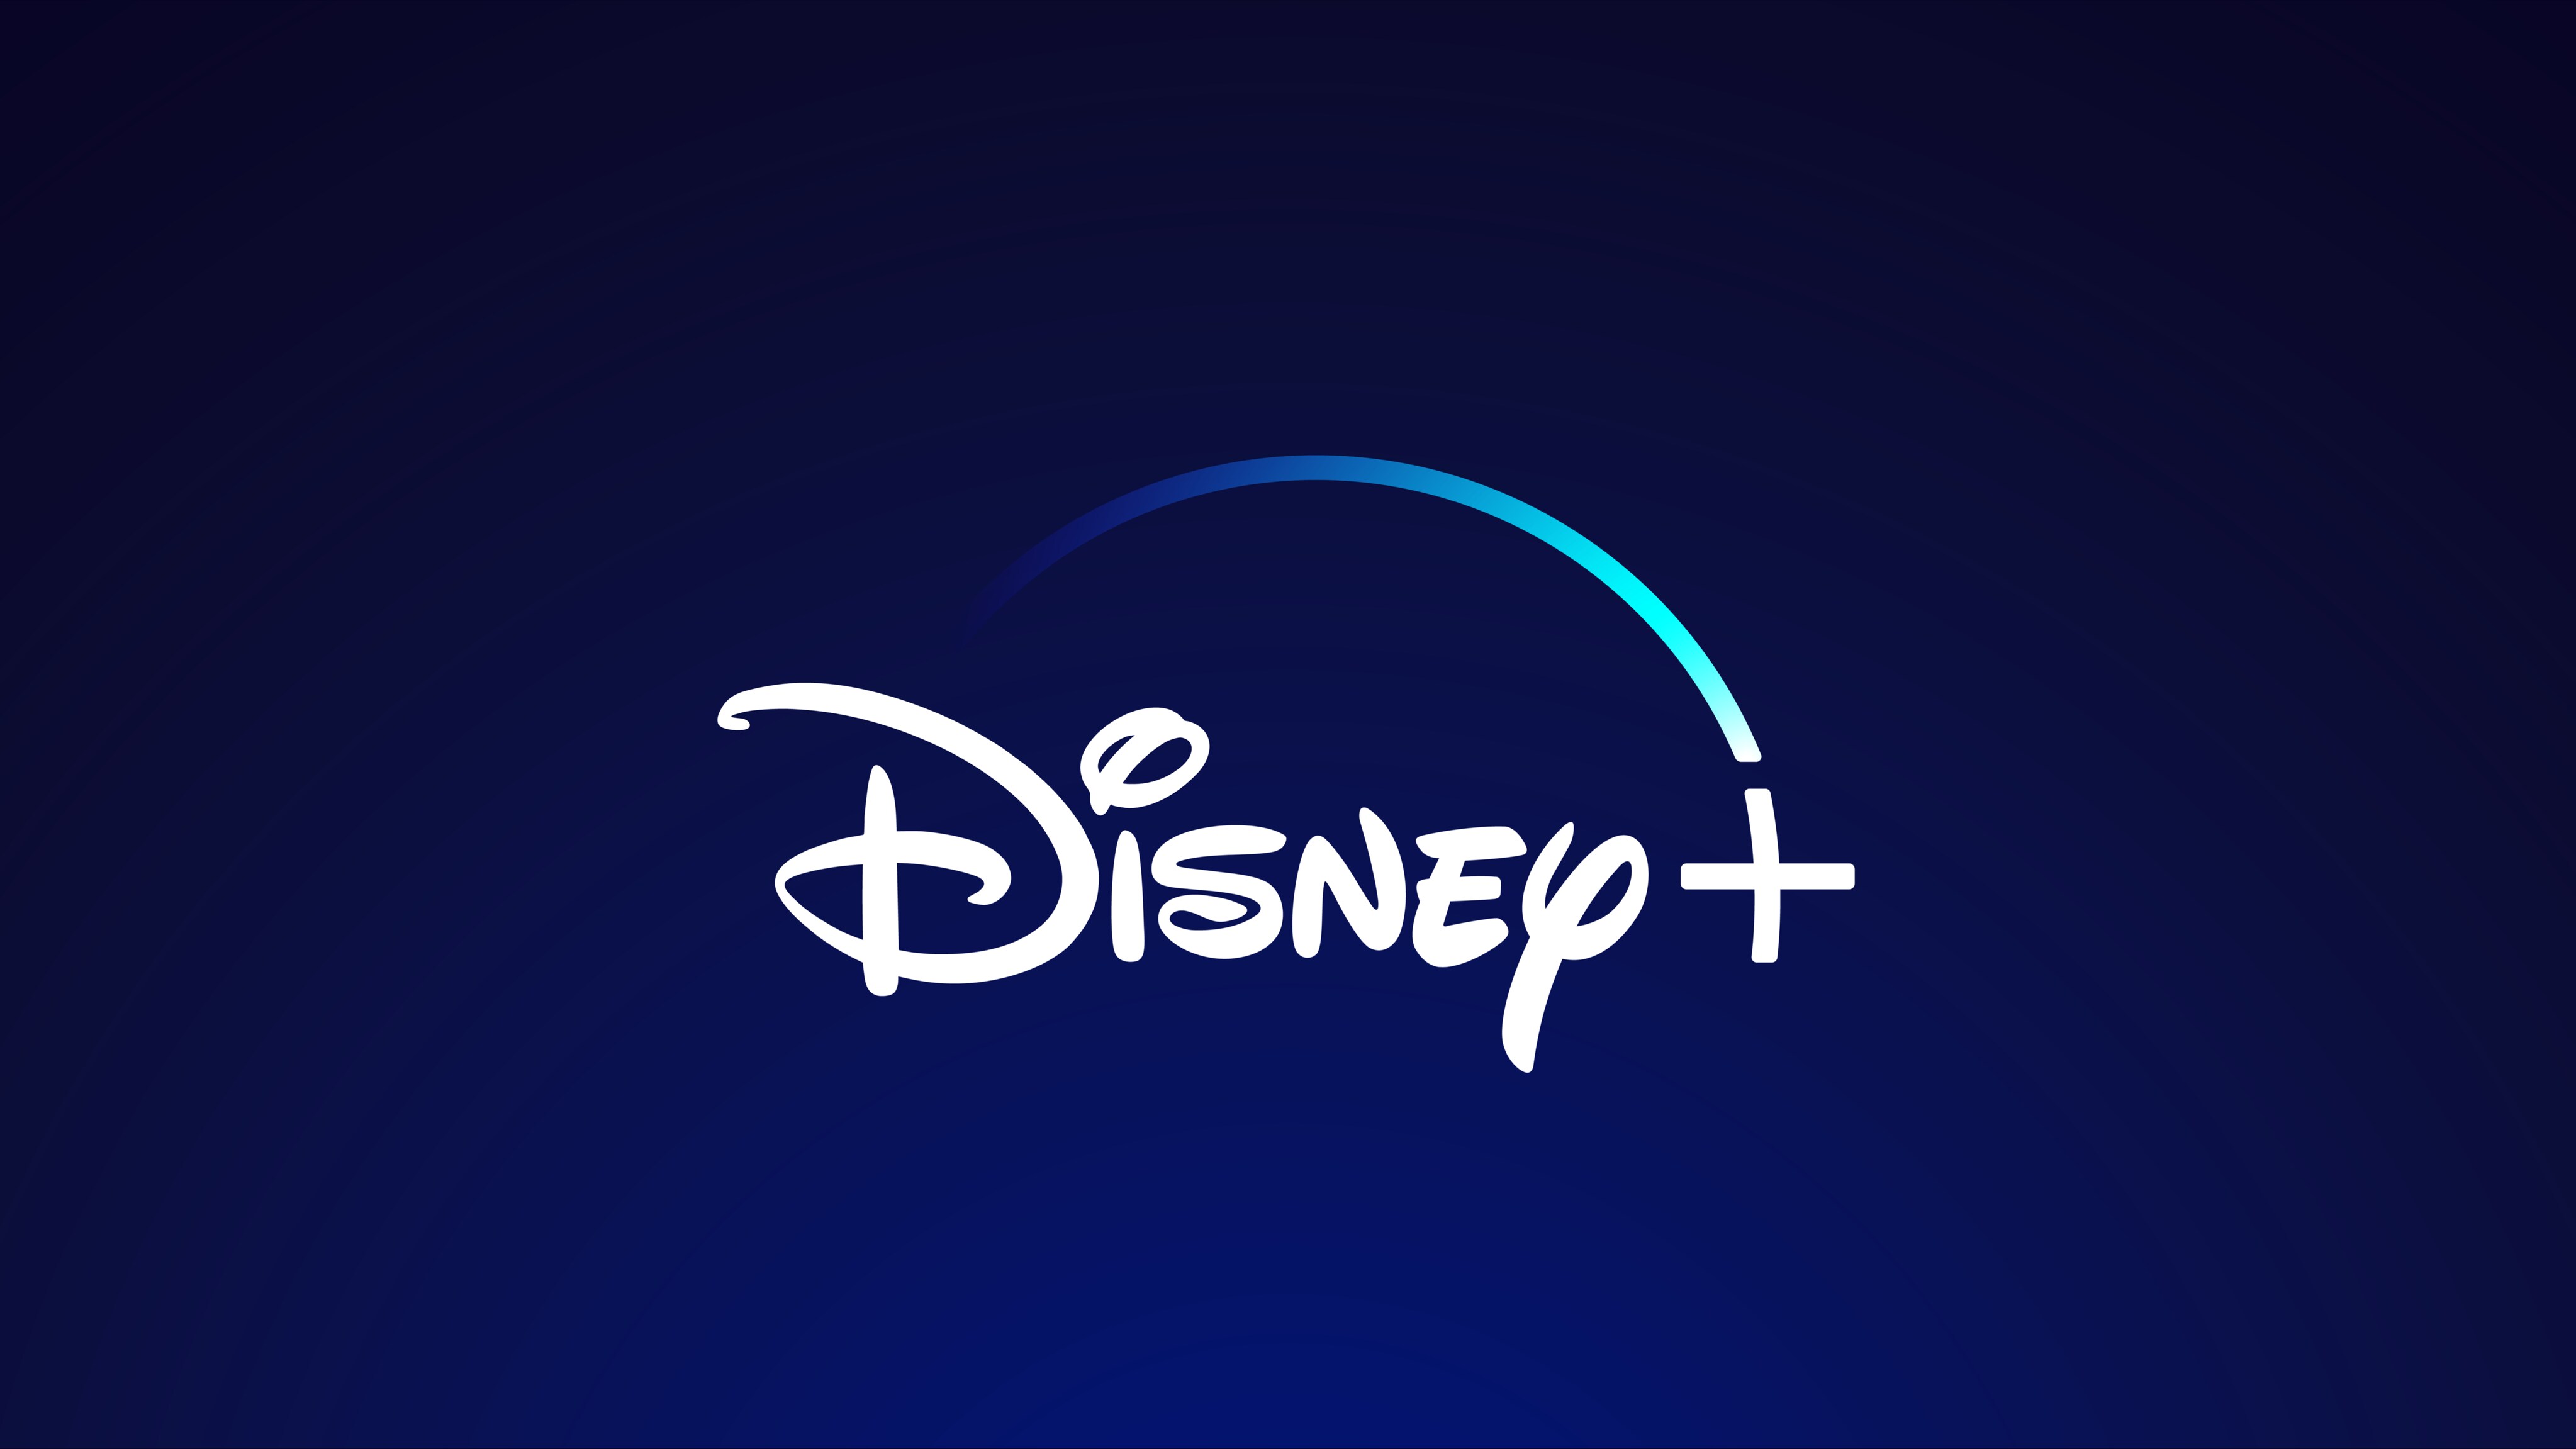 World’s Best Stories coming to India on 3 April with Disney+ Hotstar